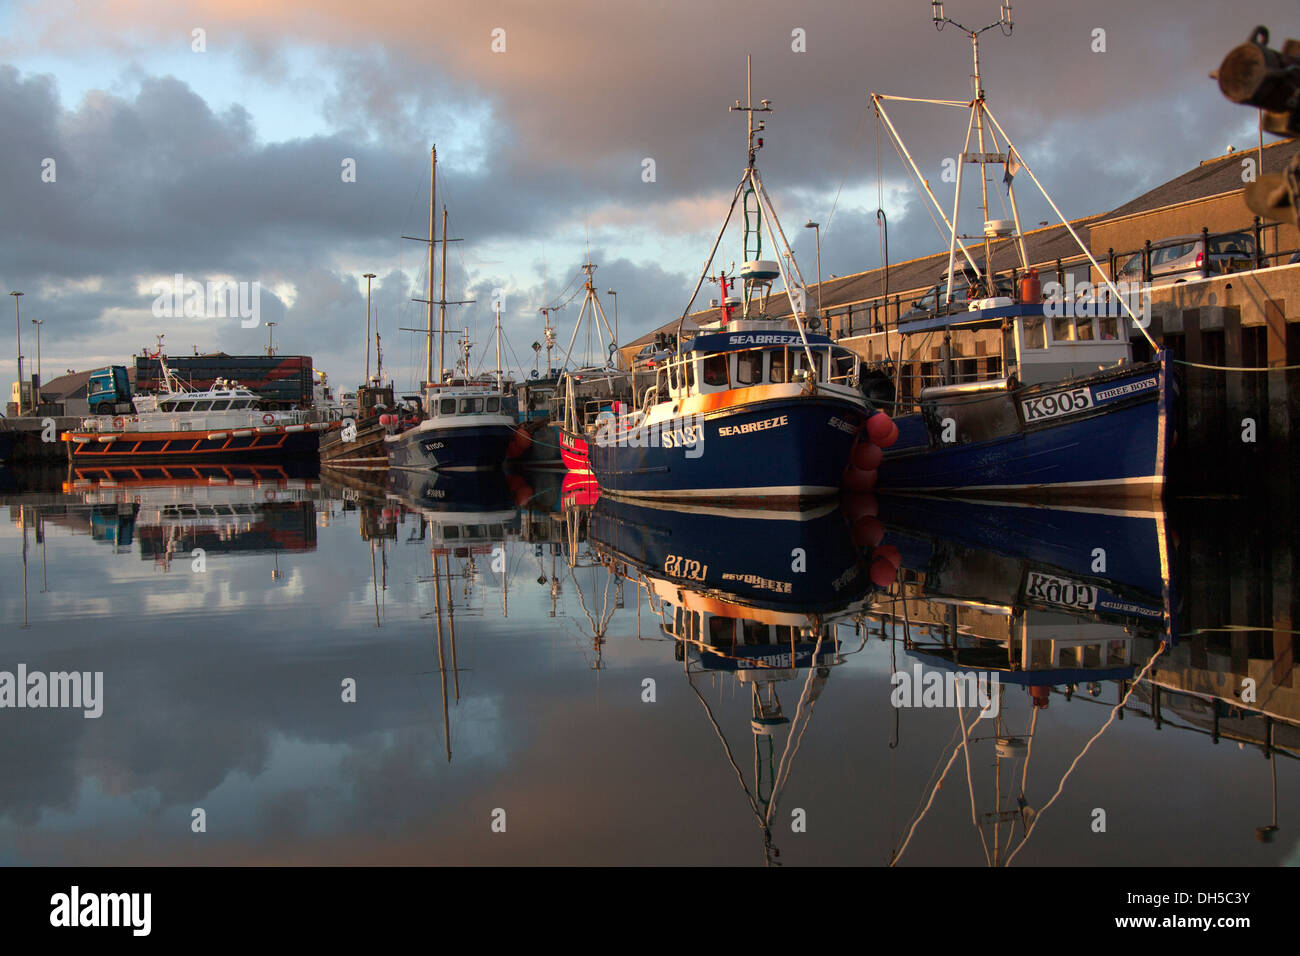 Islands of Orkney, Scotland. Picturesque early evening view of fishing boats tied-up alongside Kirkwall’s harbour basin. Stock Photo